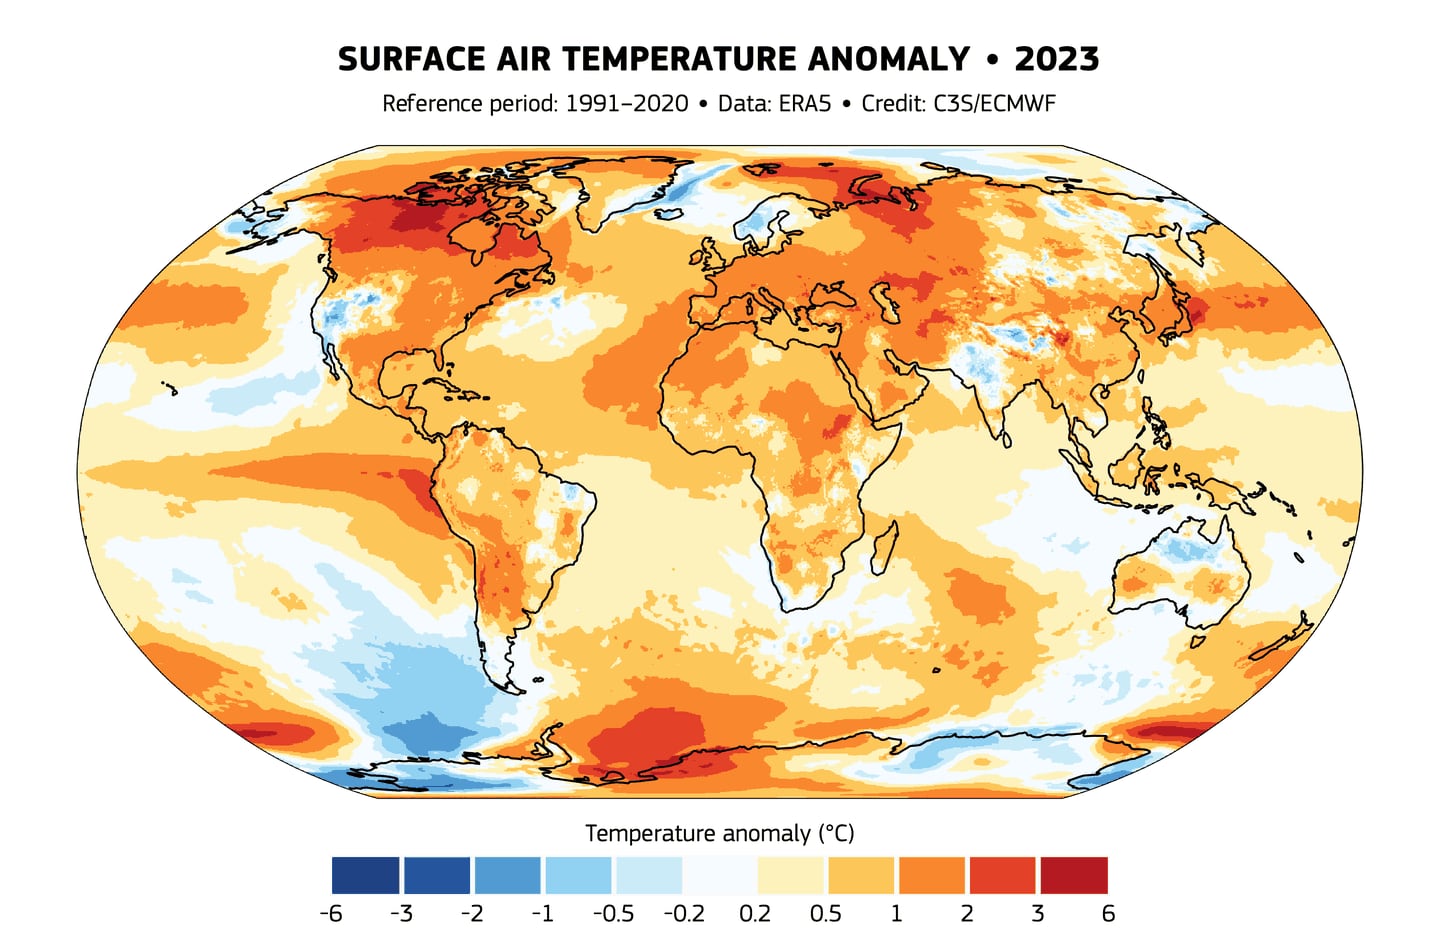 Surface air temperature anomaly for 2023 relative to the average for the 1991-2020 reference period. Data source: ERA5.